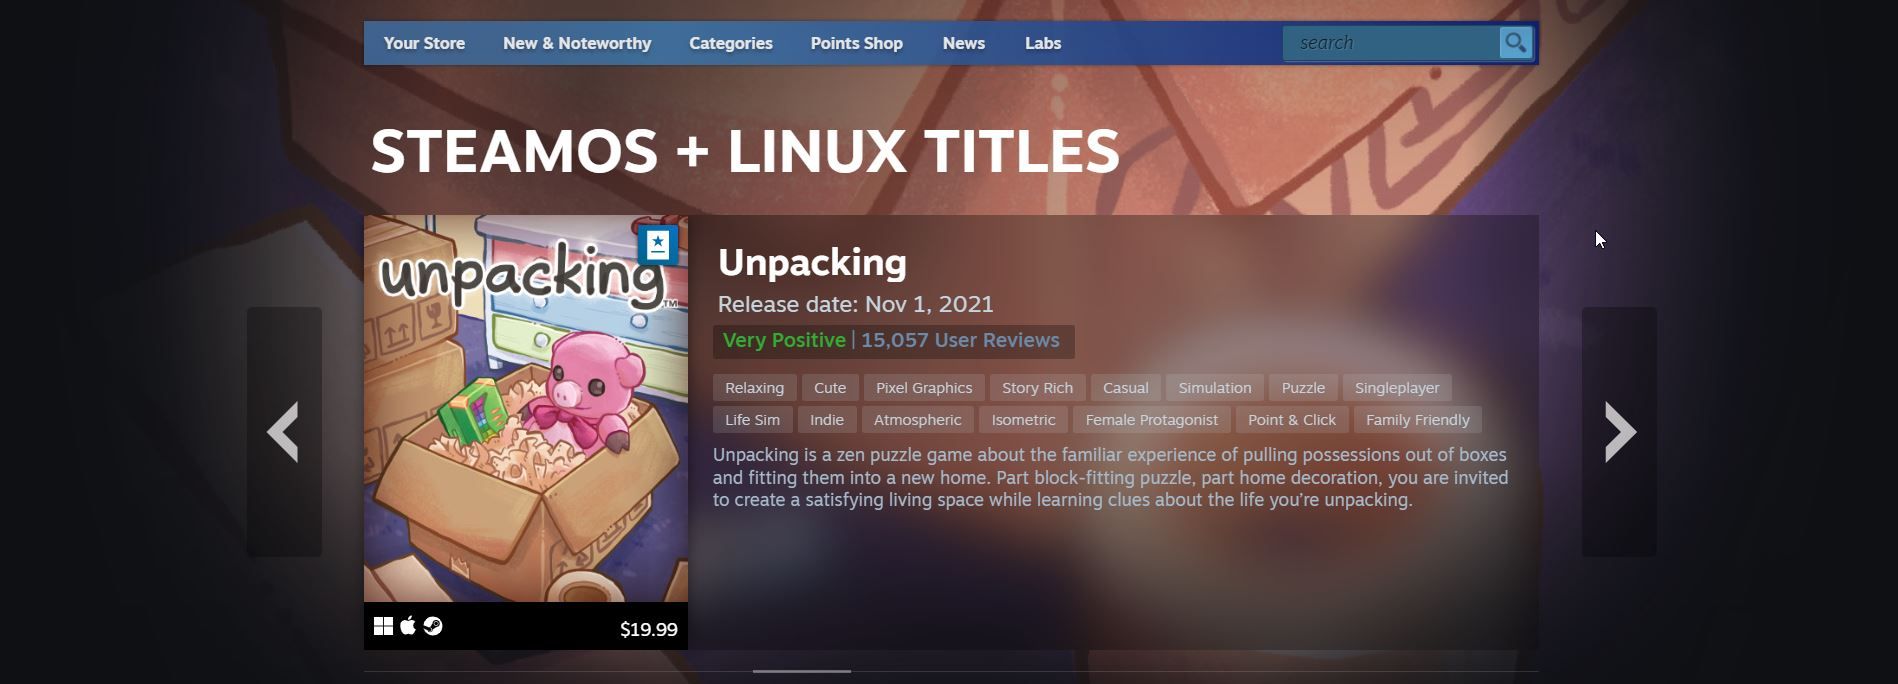 Seam Linux games store page in December 2022